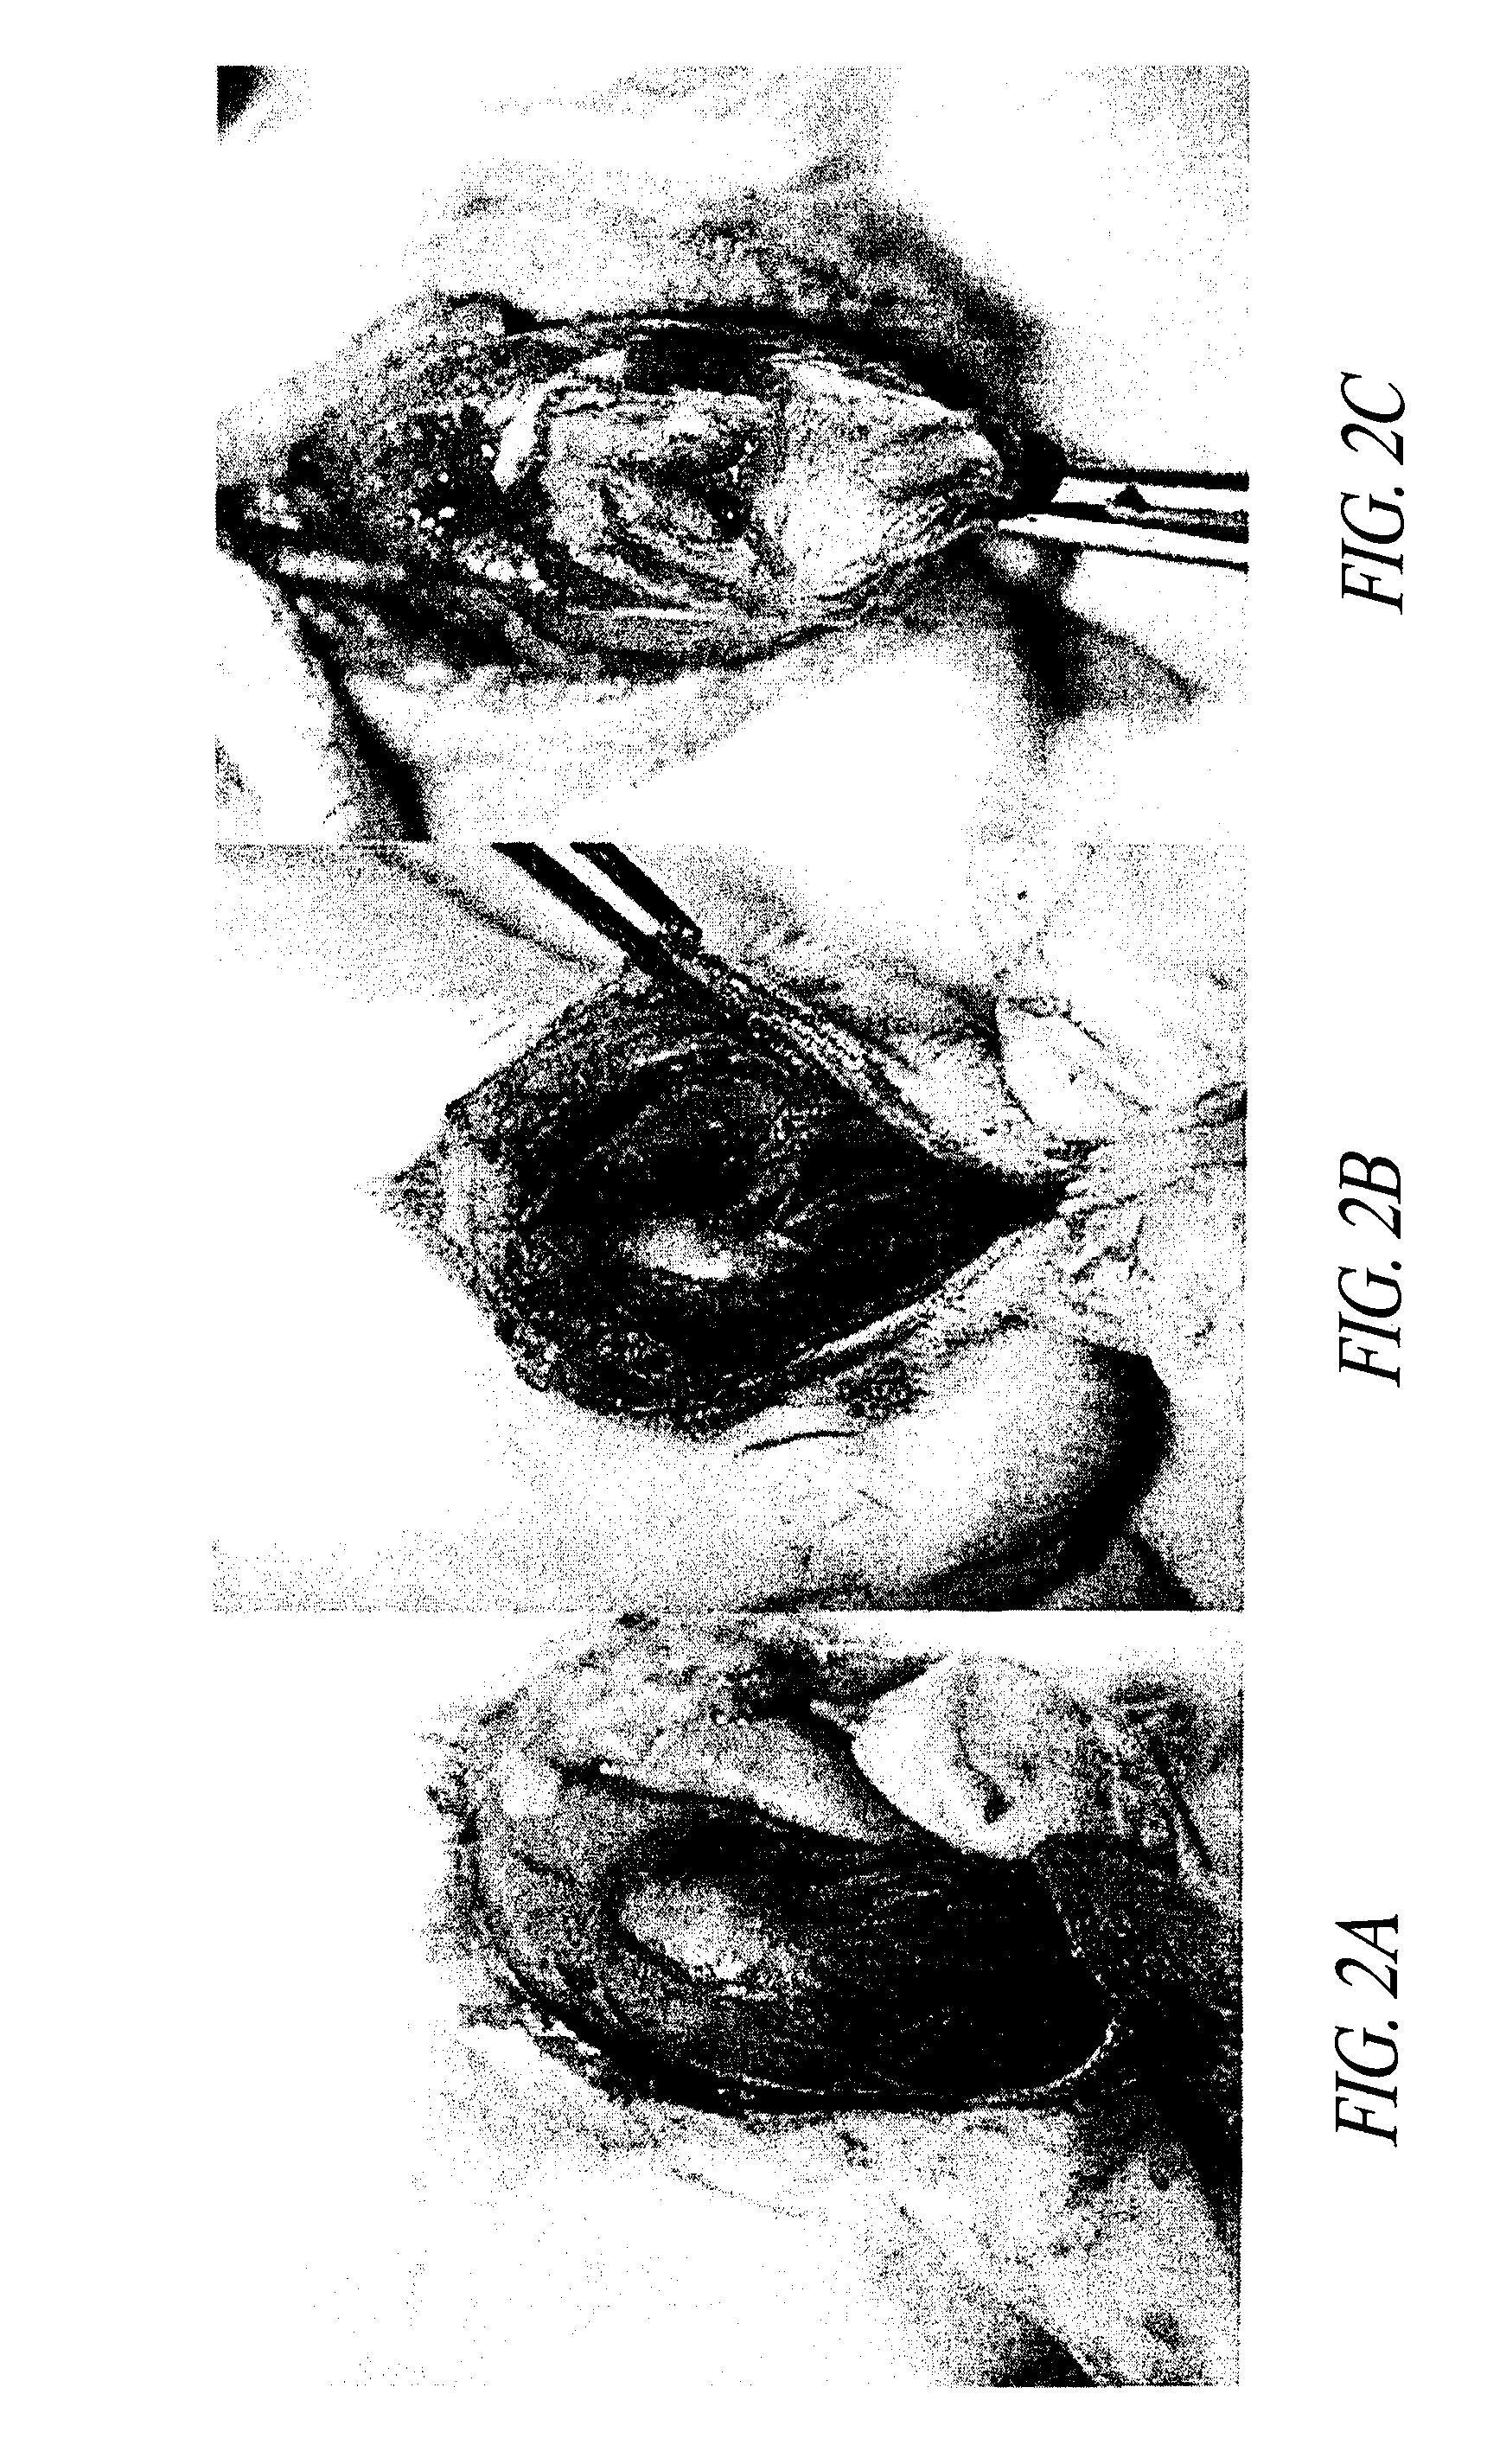 Compositions and methods for treating contracture